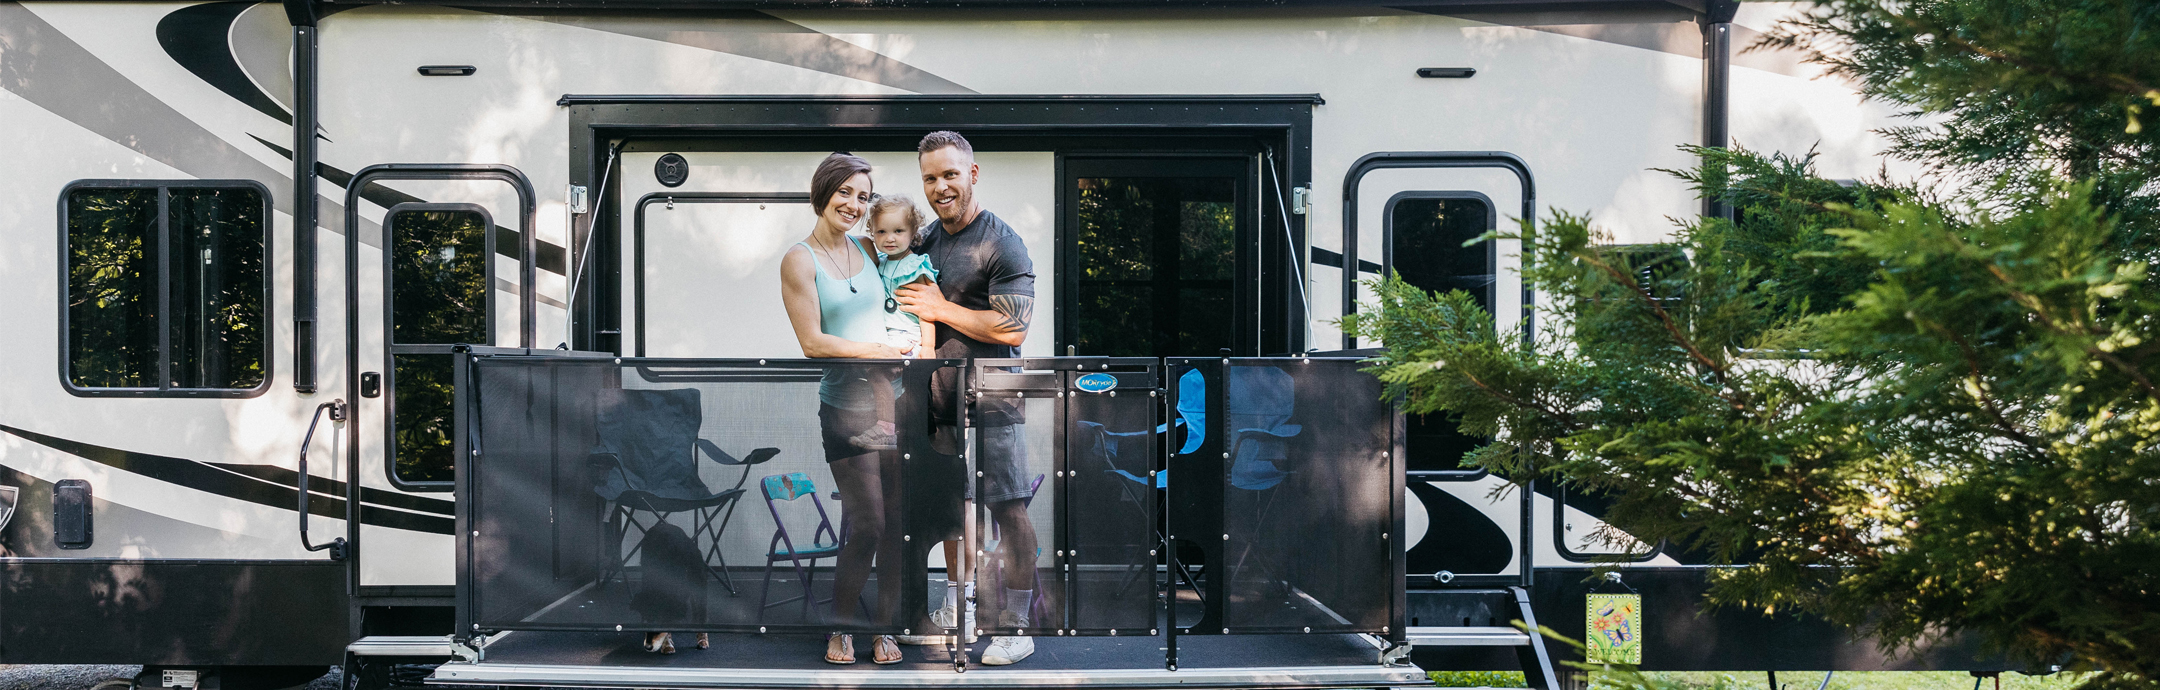 A couple holding a small child on the patio of an RV.